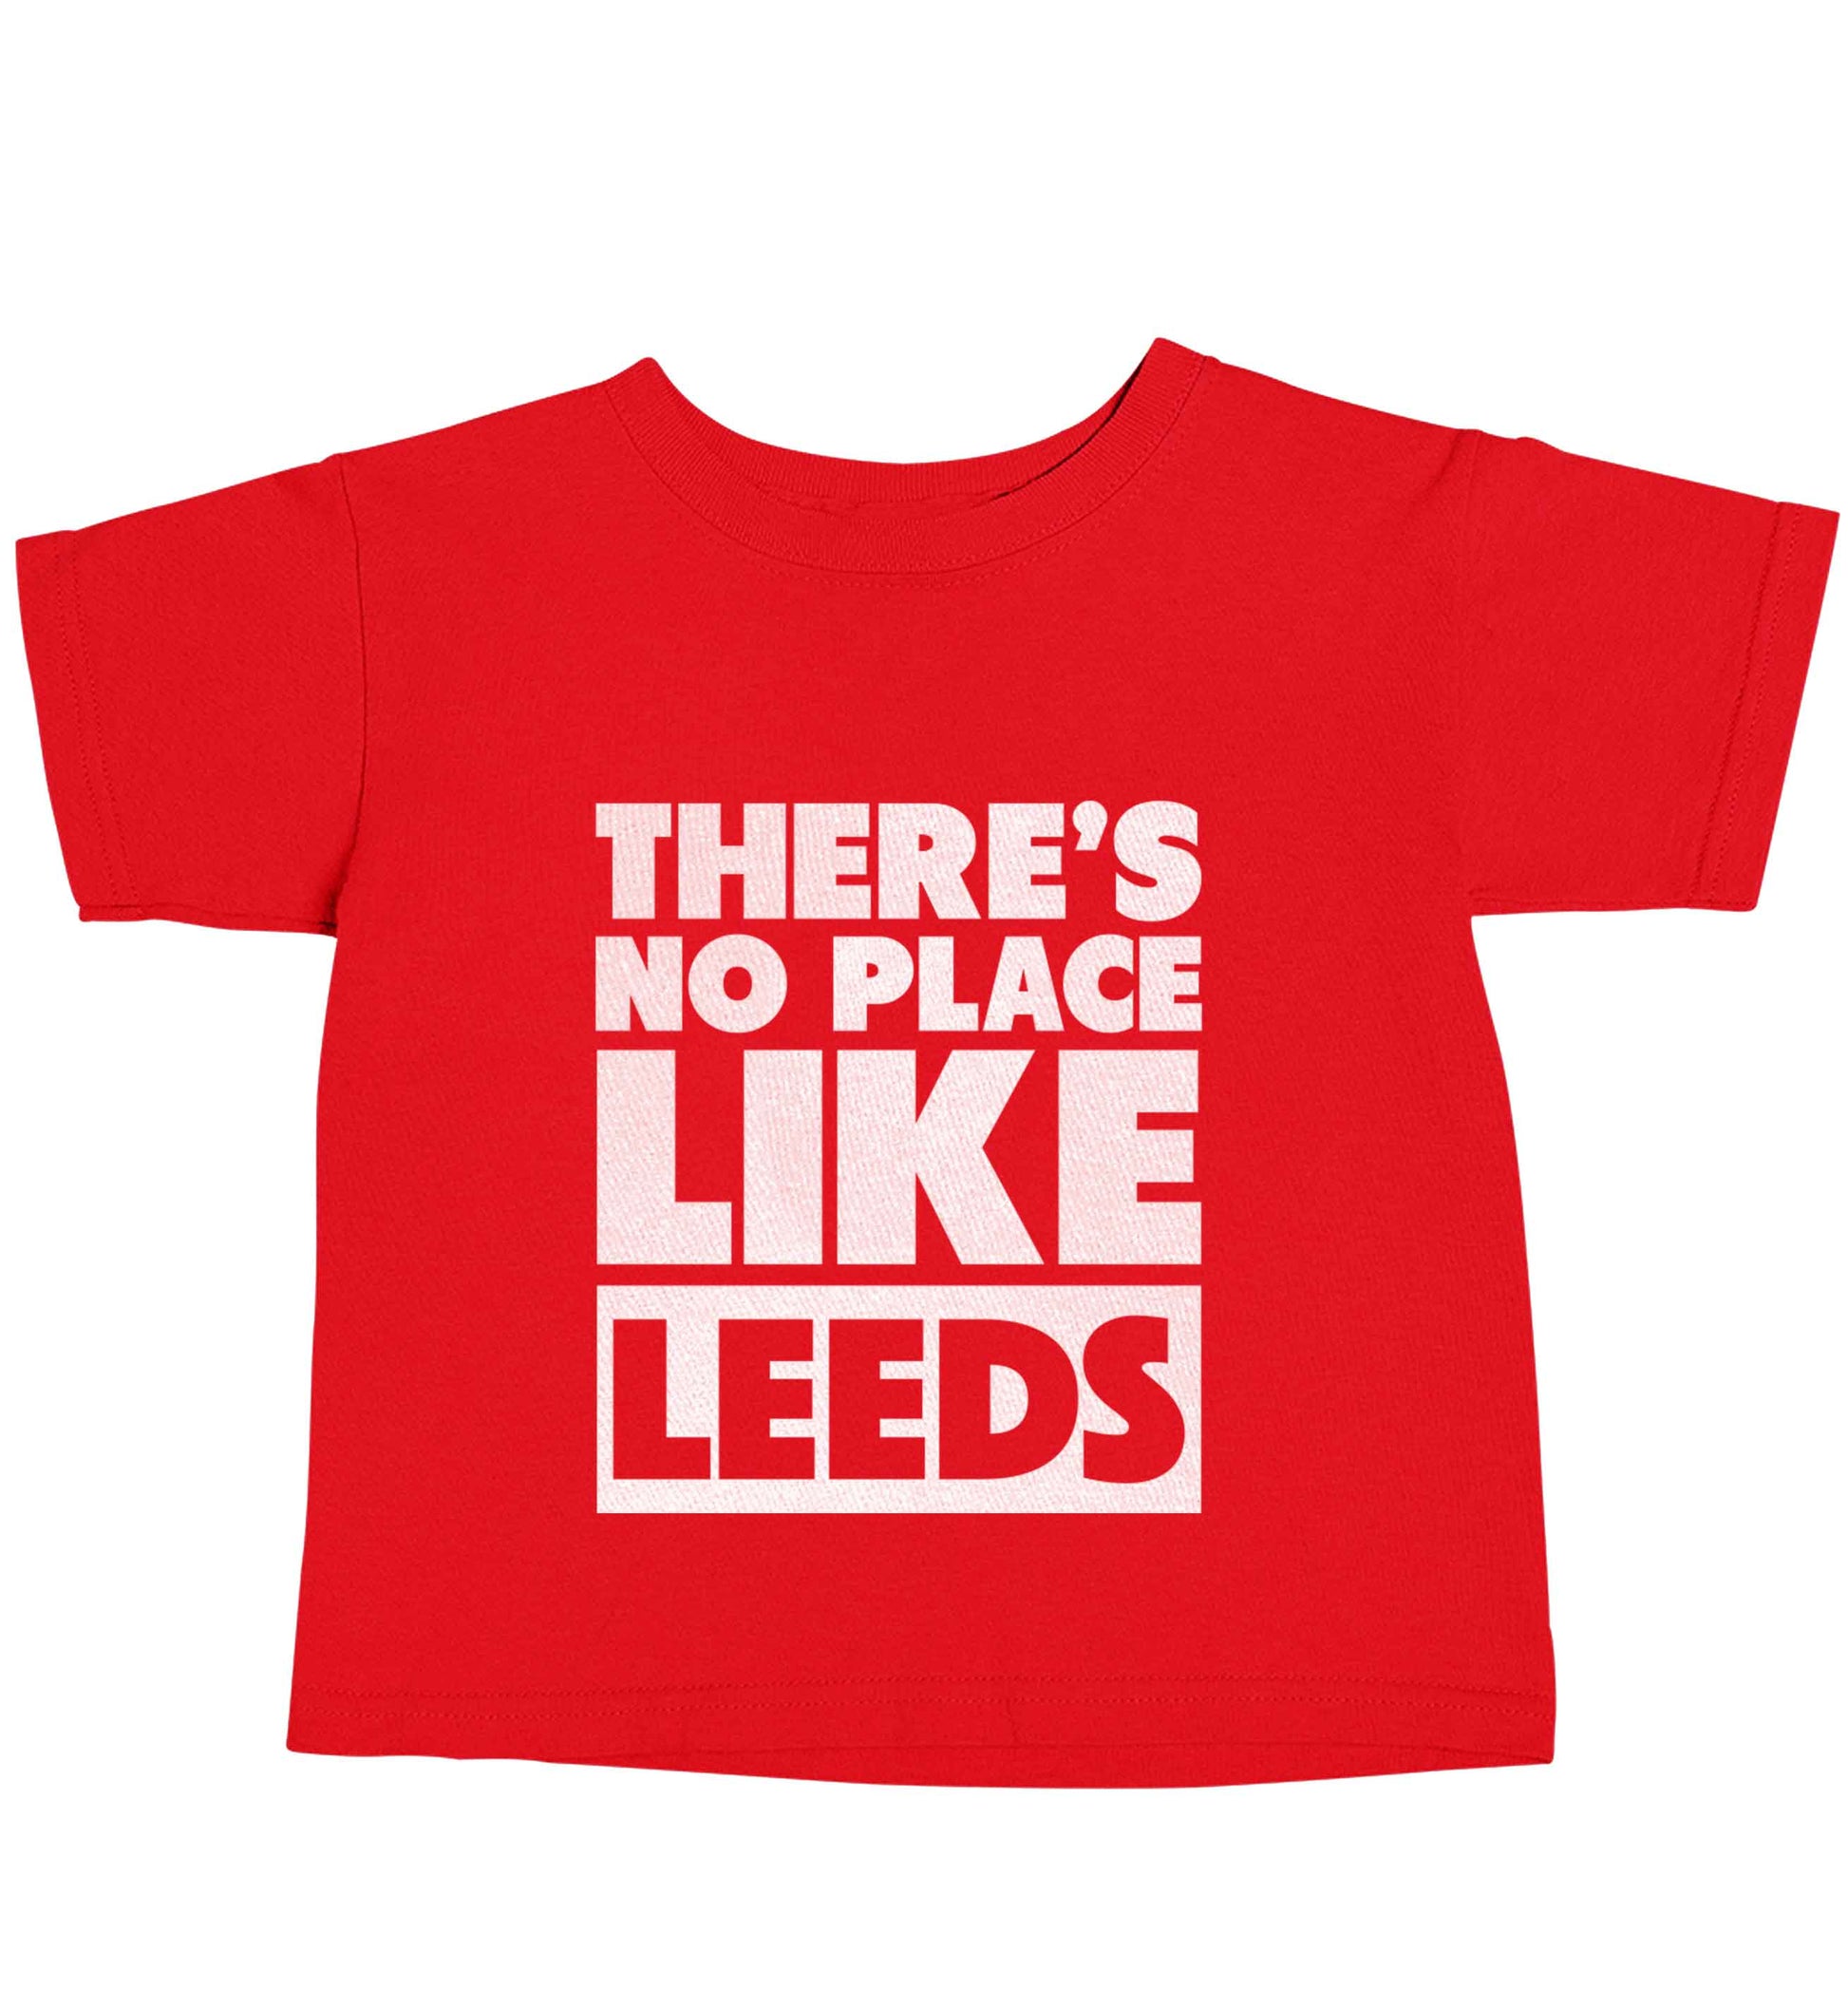 There's no place like Leeds red baby toddler Tshirt 2 Years